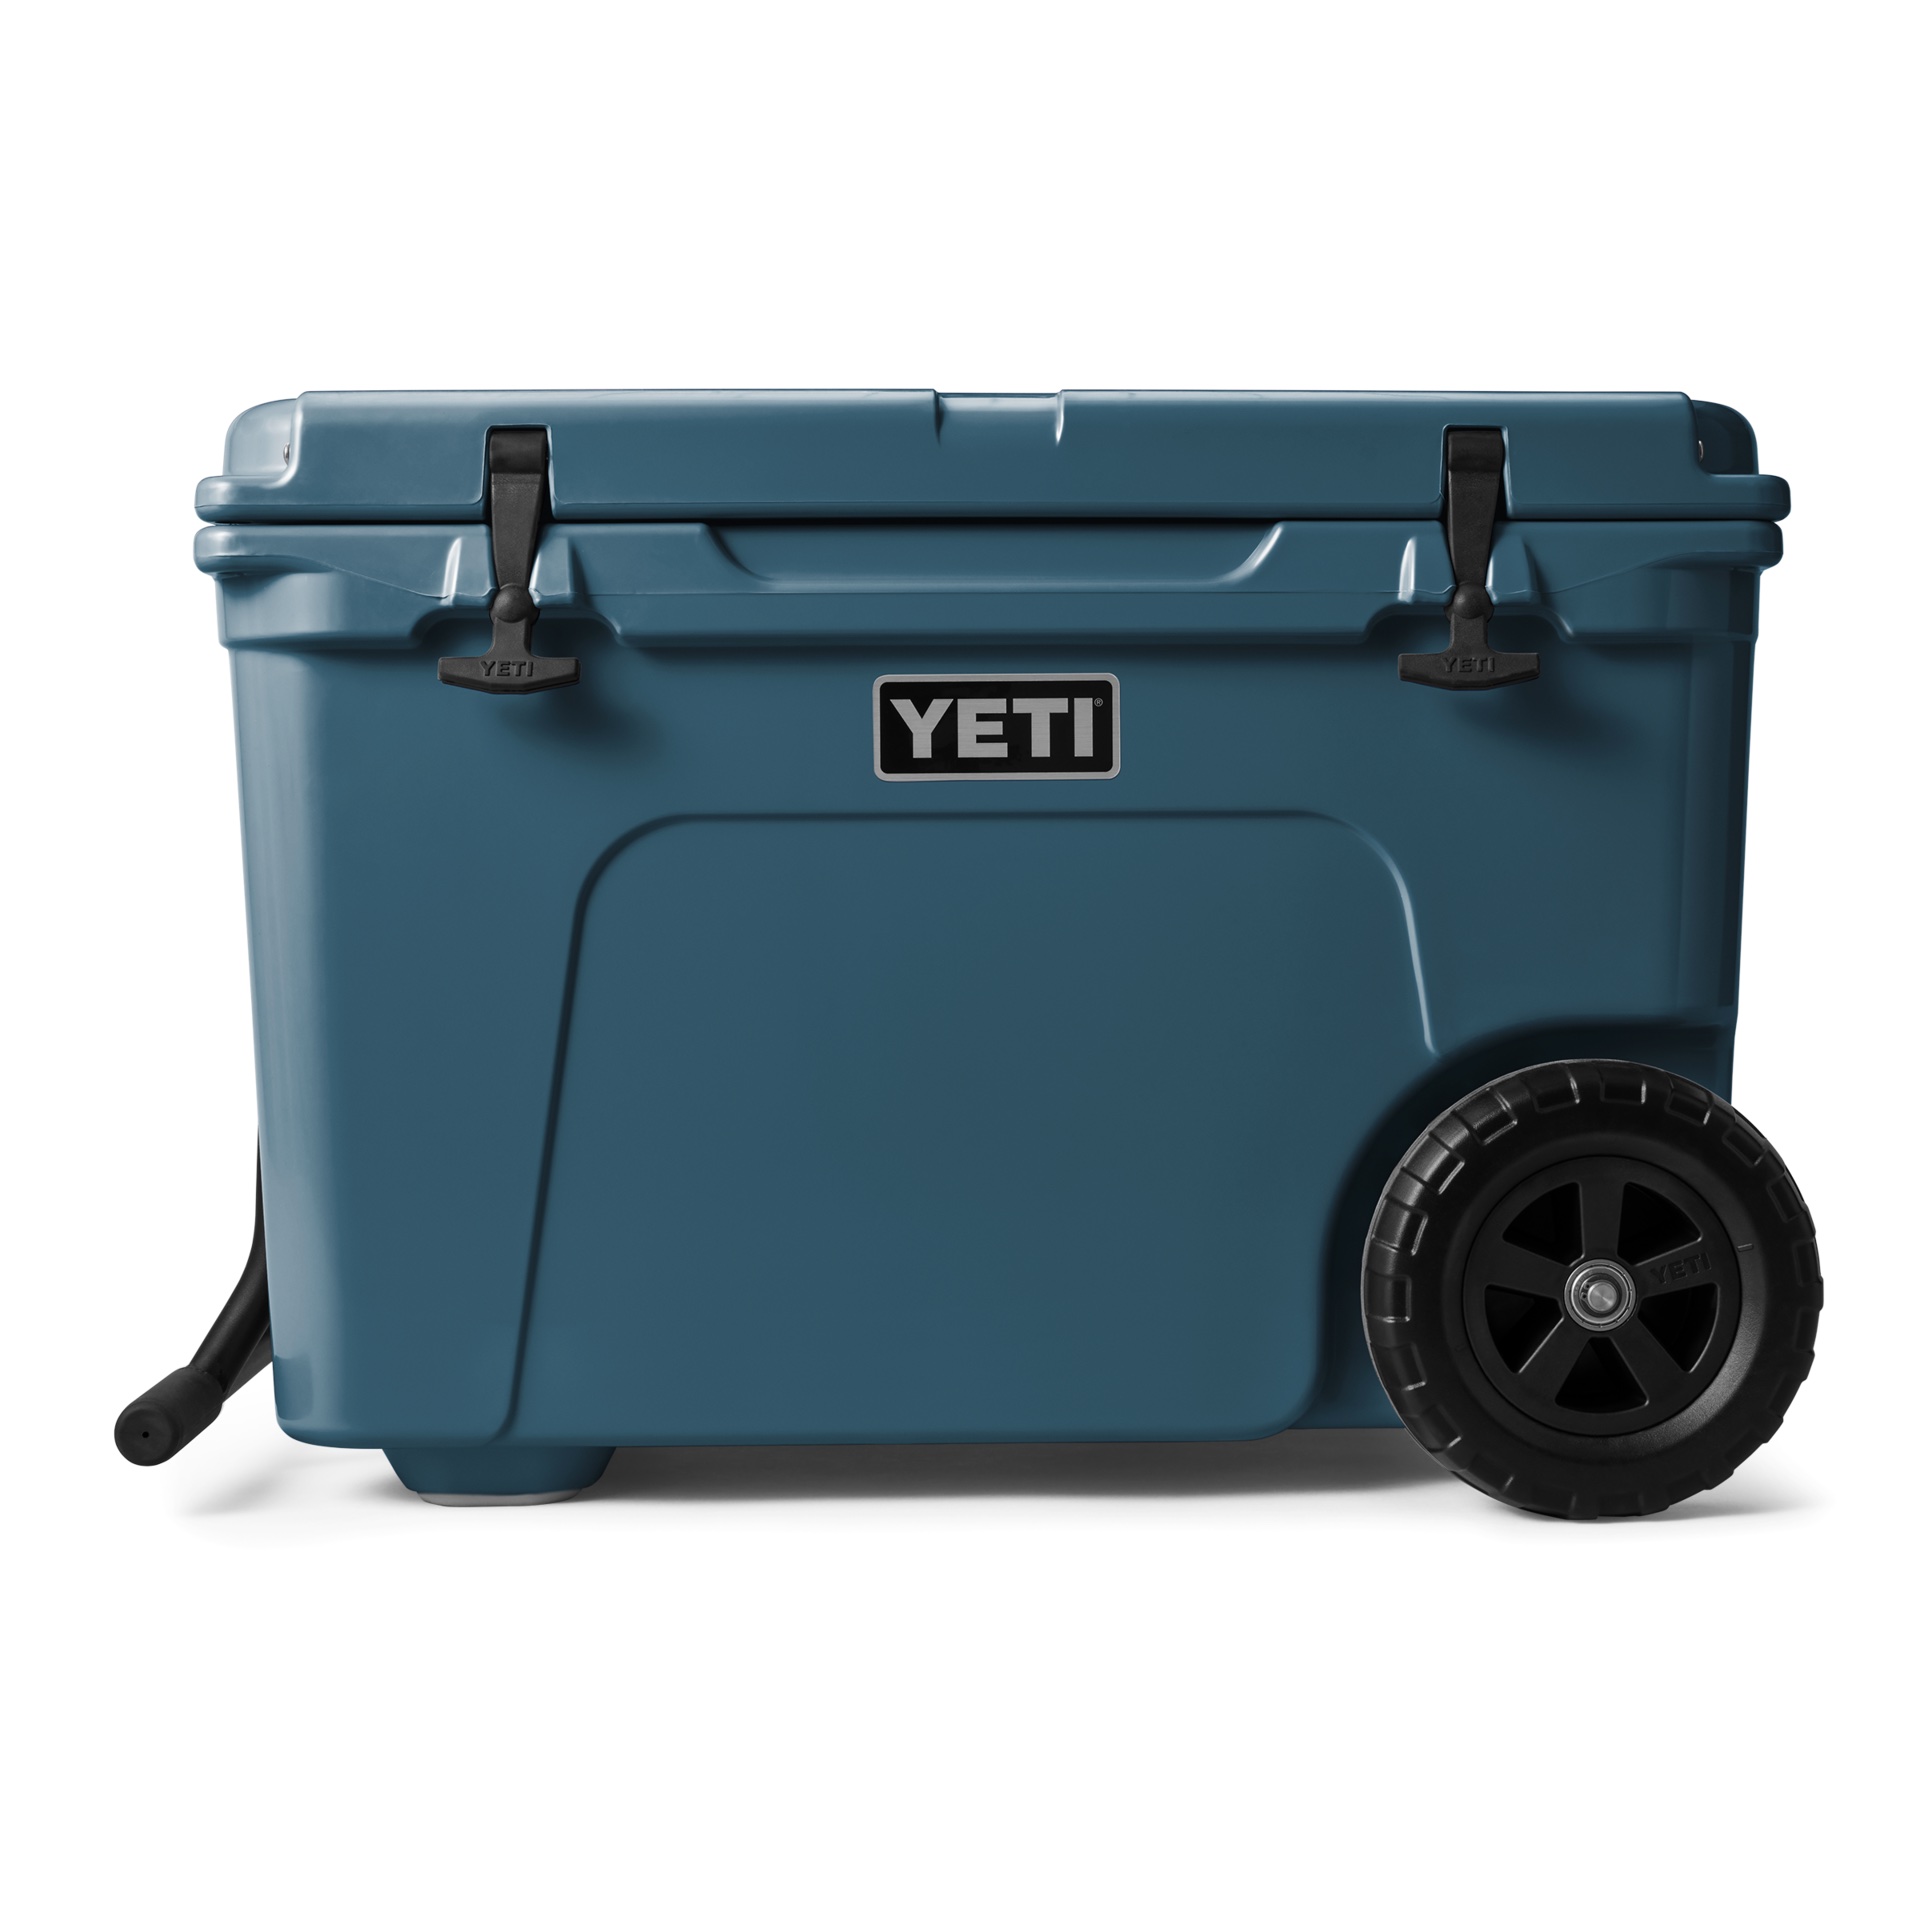 YETI Launches New Nordic Collection For The Summer - Here's How To Buy ...